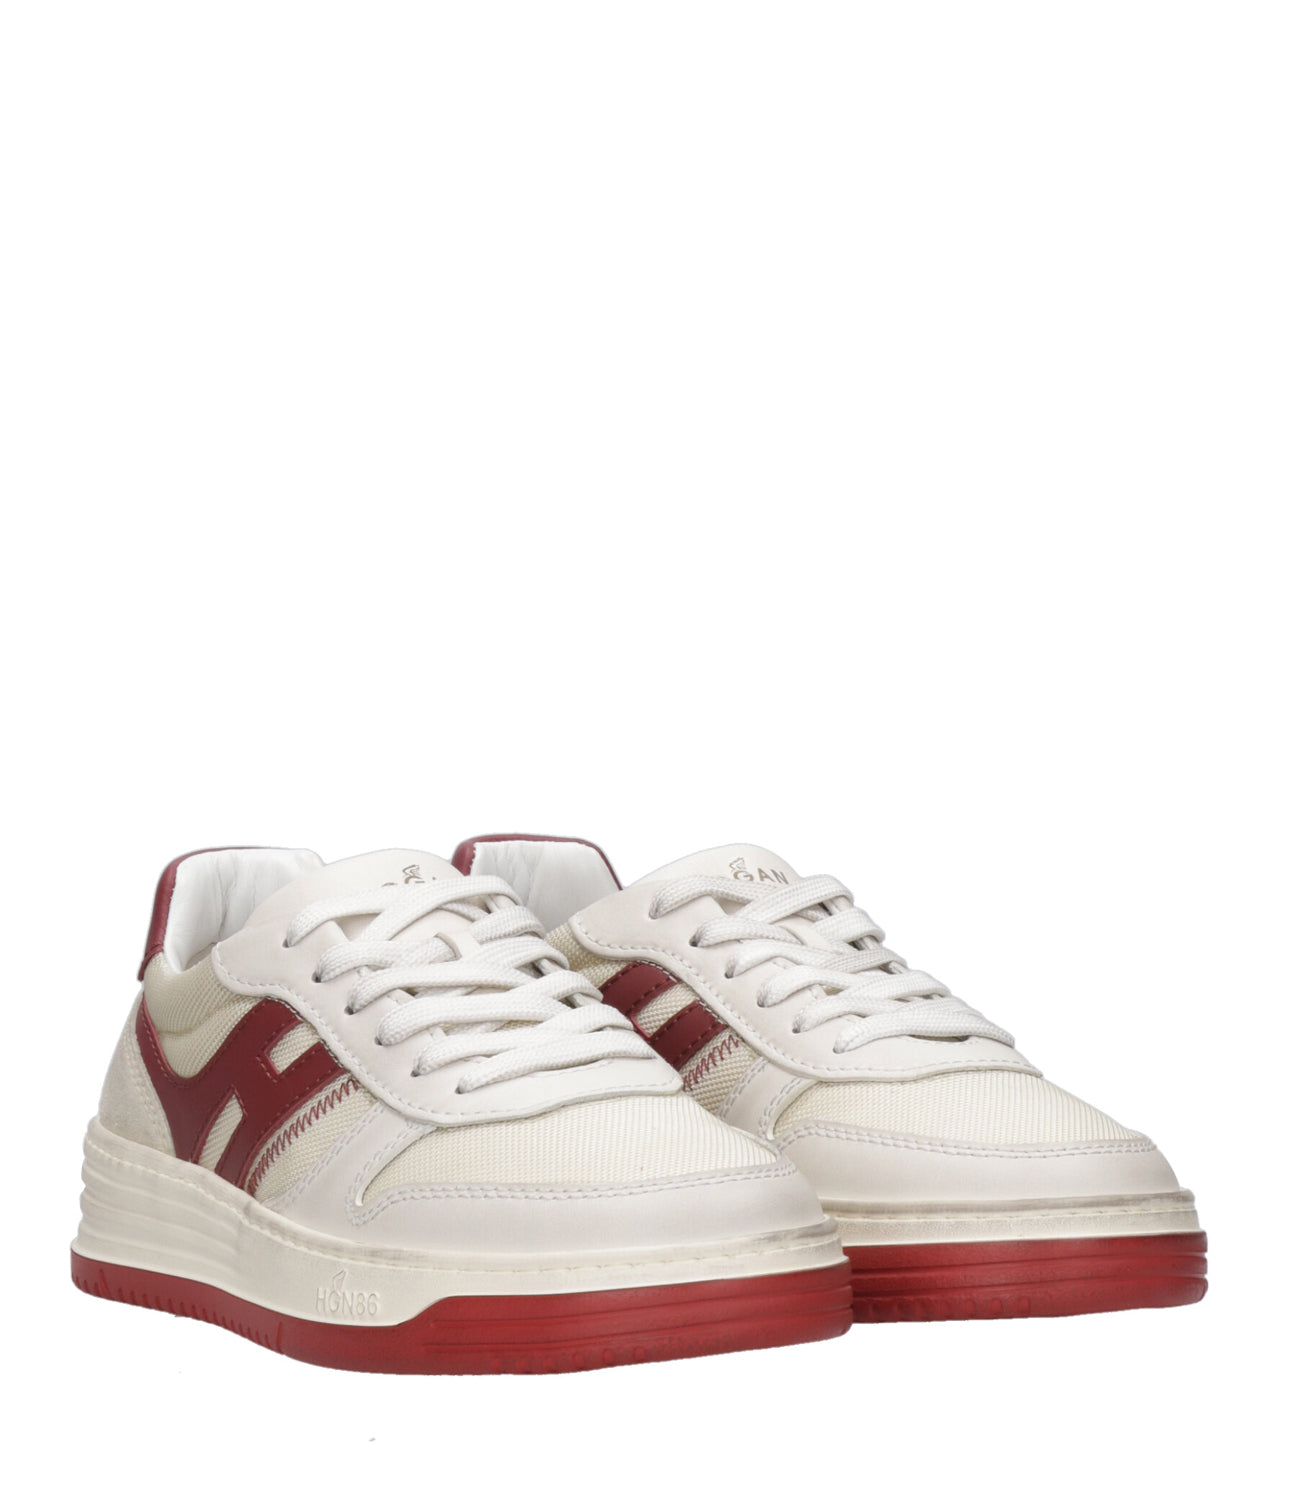 Hogan | Sneakers H630 Beige and Red